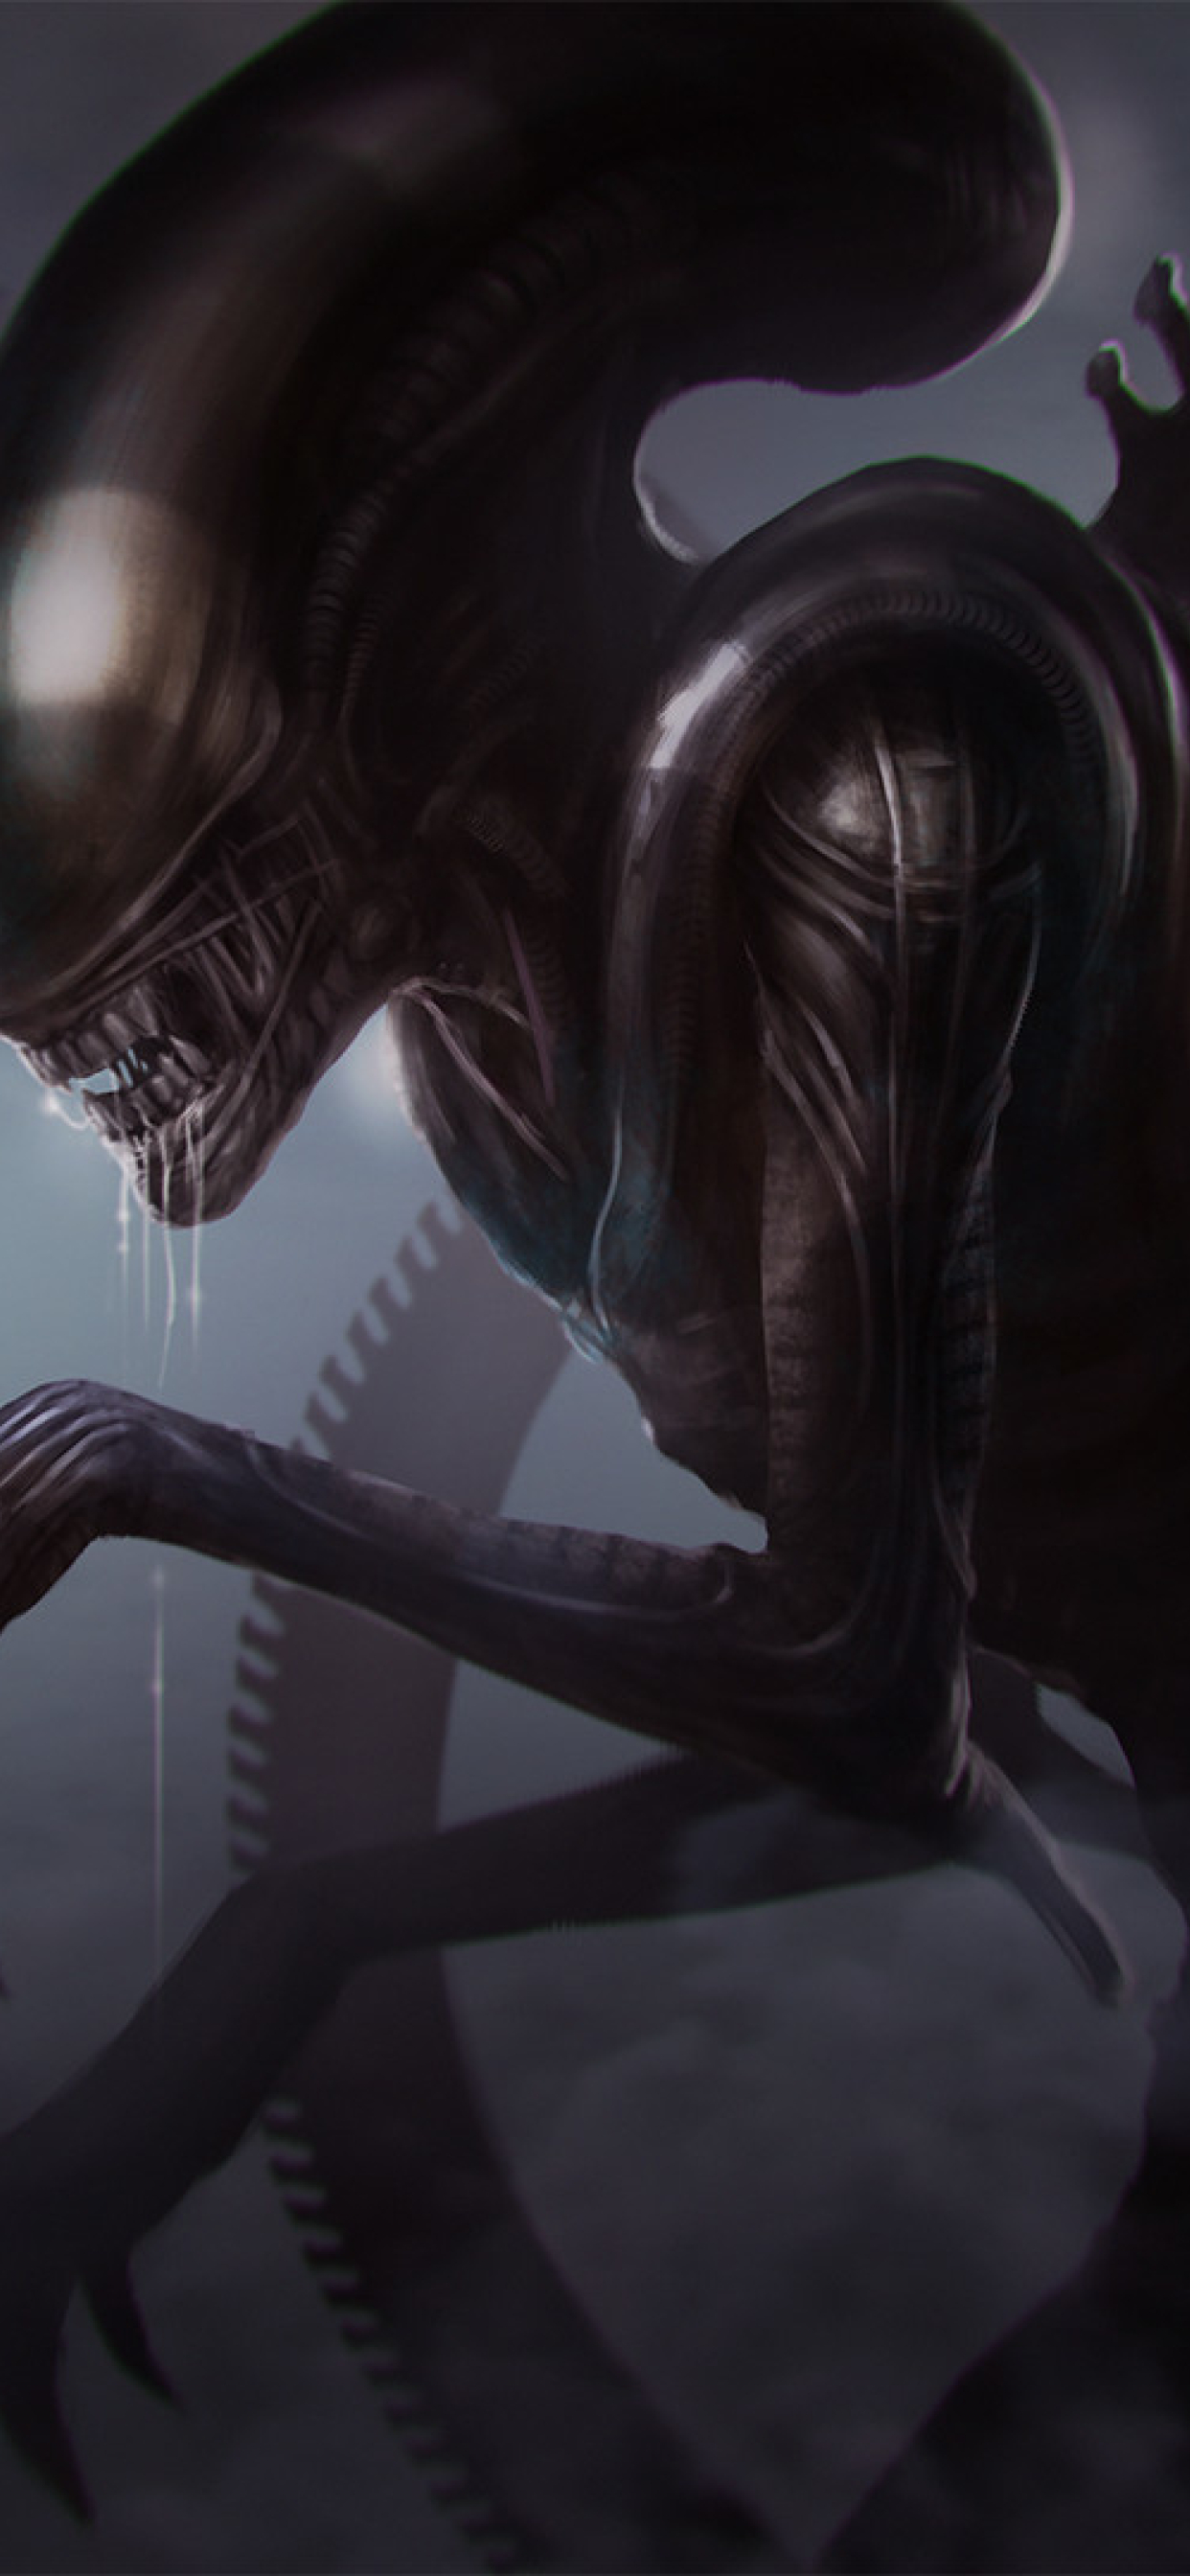 1242x26 Xenomorph Queen Iphone Xs Max Wallpaper Hd Fantasy 4k Wallpapers Images Photos And Background Wallpapers Den